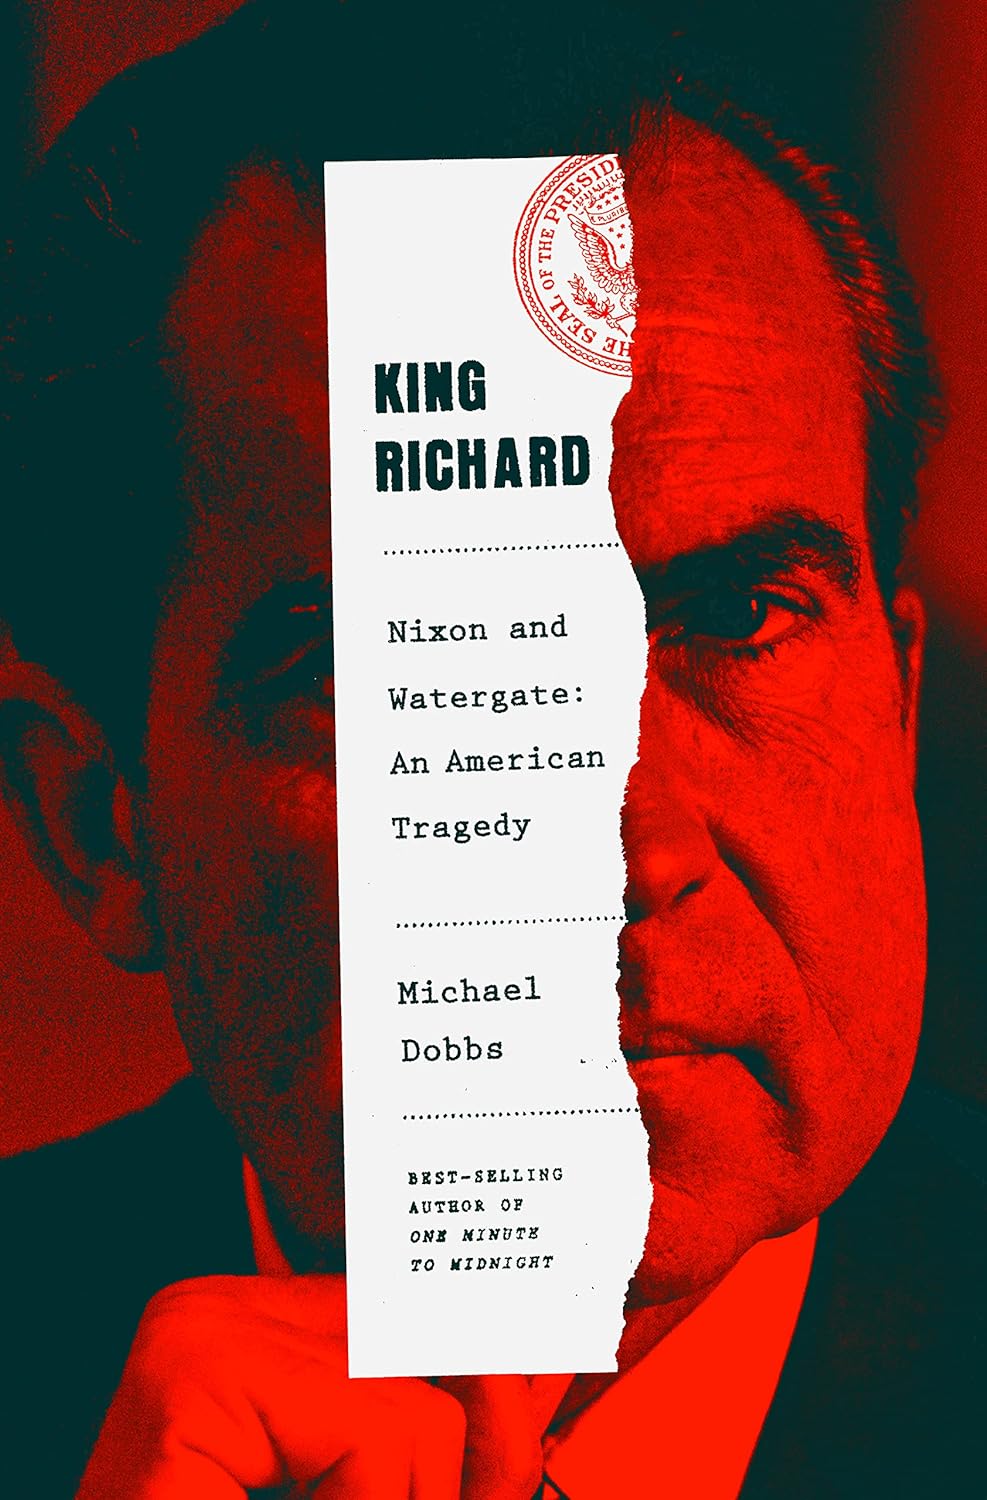 Image for "King Richard: Nixon and Watergate - An American Tragedy"